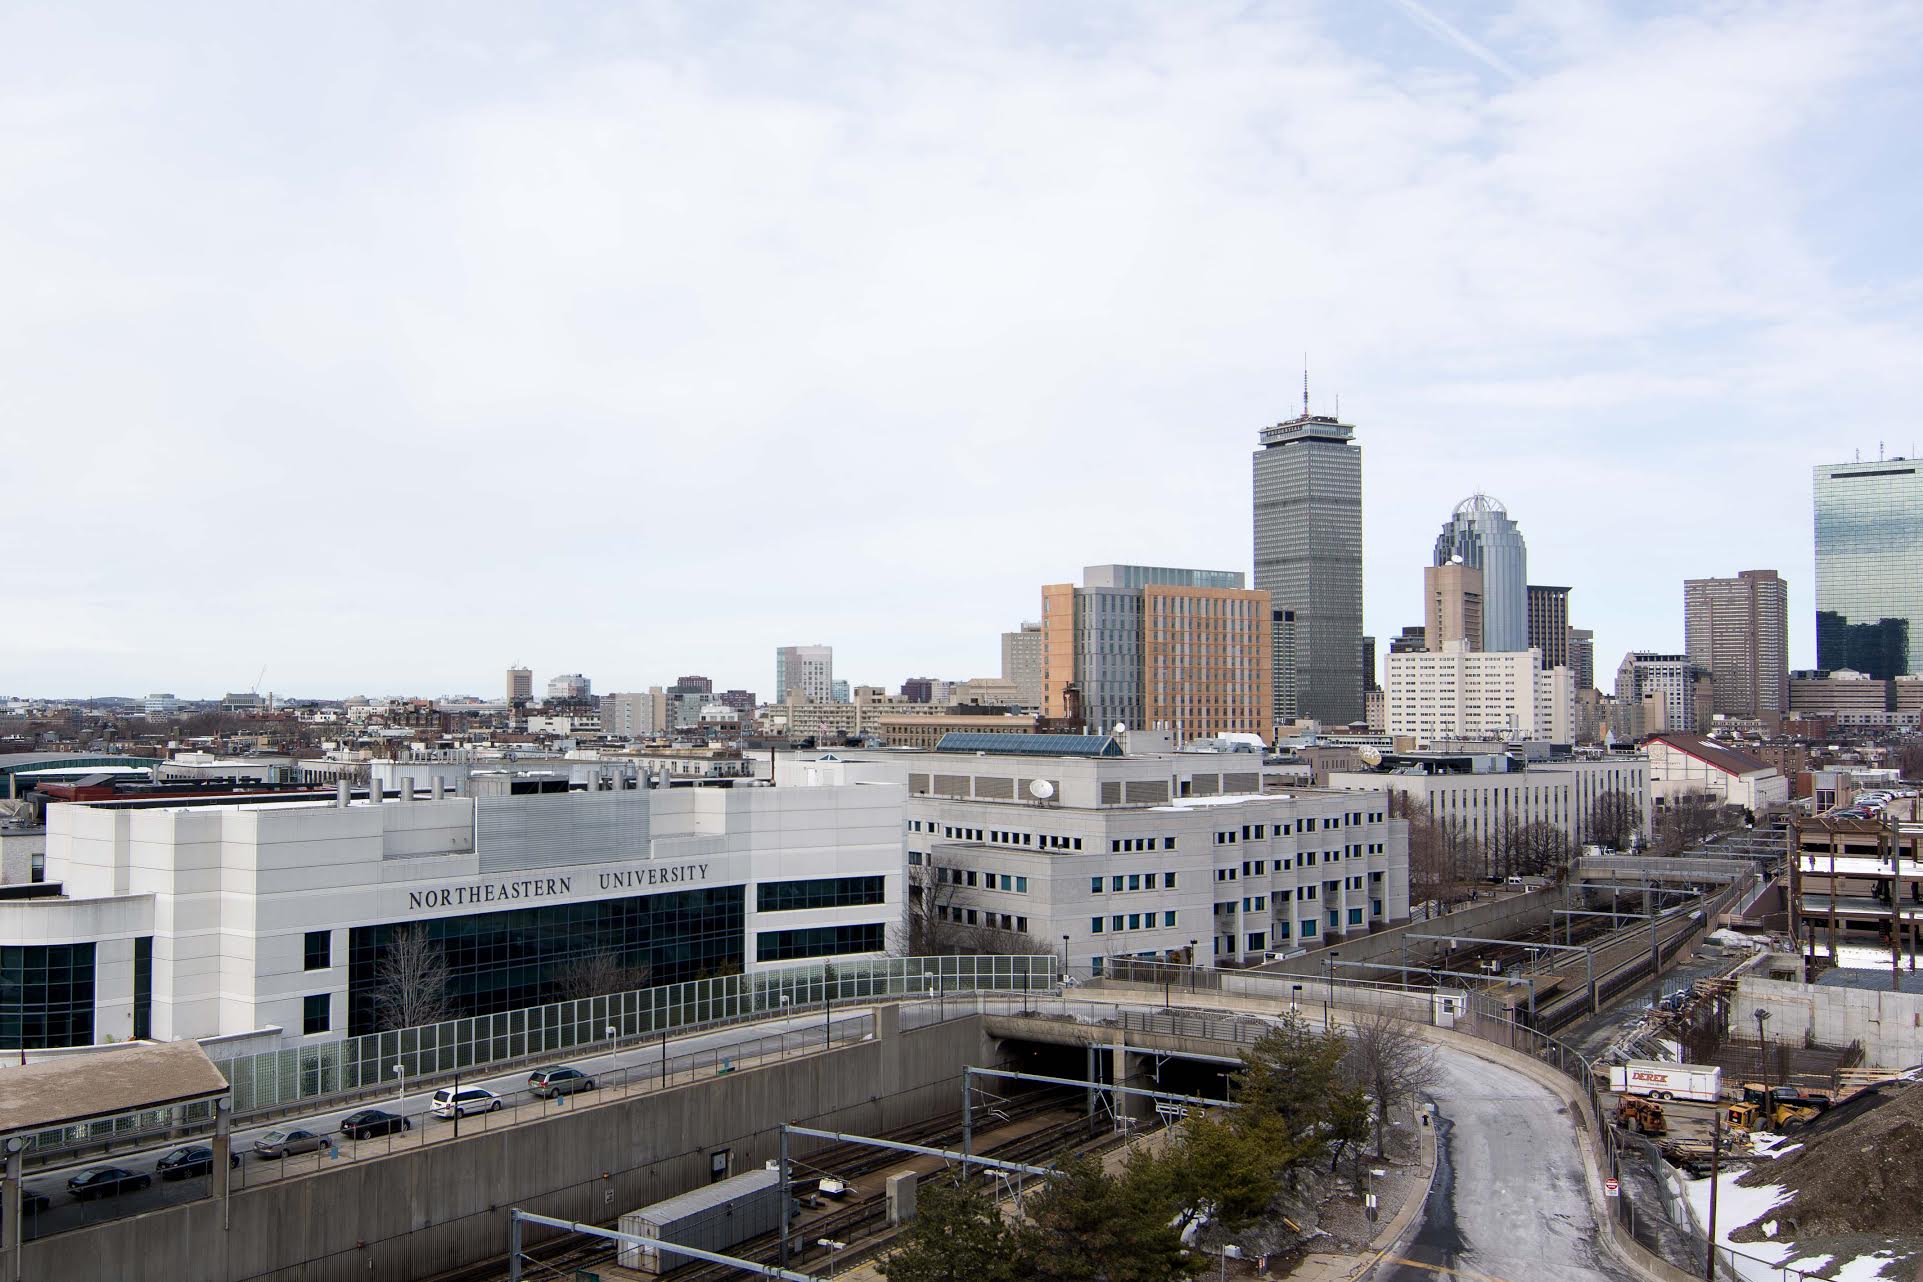 After initially refusing to pay the $2.5 million the City of Boston requested in lieu of taxes for the 2014 fiscal year, Northeastern has paid $886,000. It is one of 15 universities that has not paid the full requested amount. Pictured: Northeastern with a backdrop of Bostons skyline. Photo by Joe Thomas.